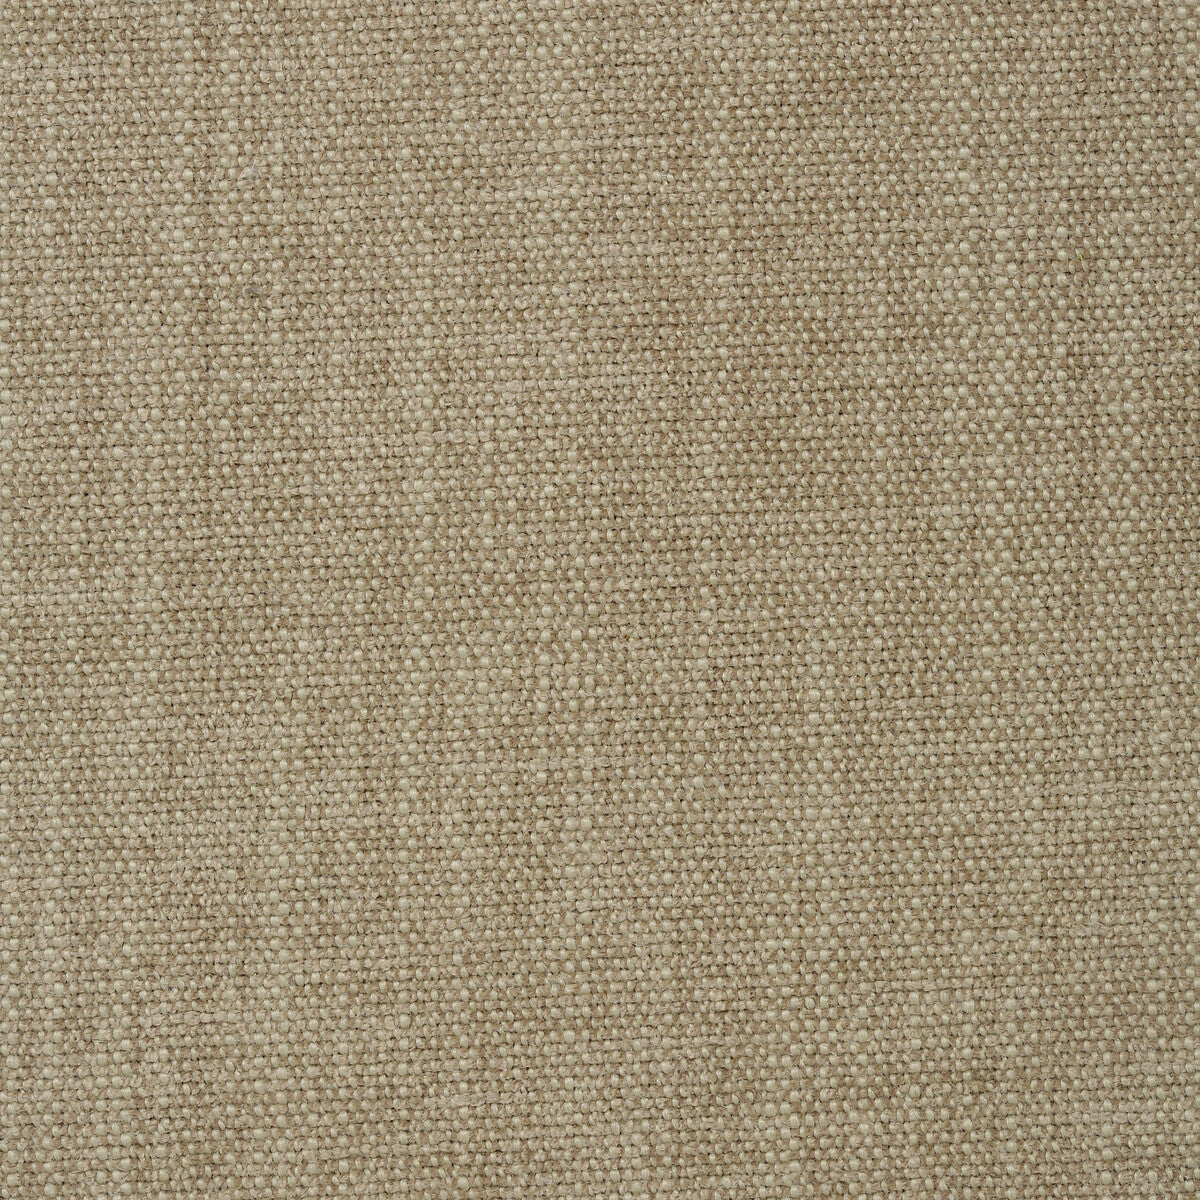 Kravet Contract fabric in 35114-16 color - pattern 35114.16.0 - by Kravet Contract in the Crypton Incase collection